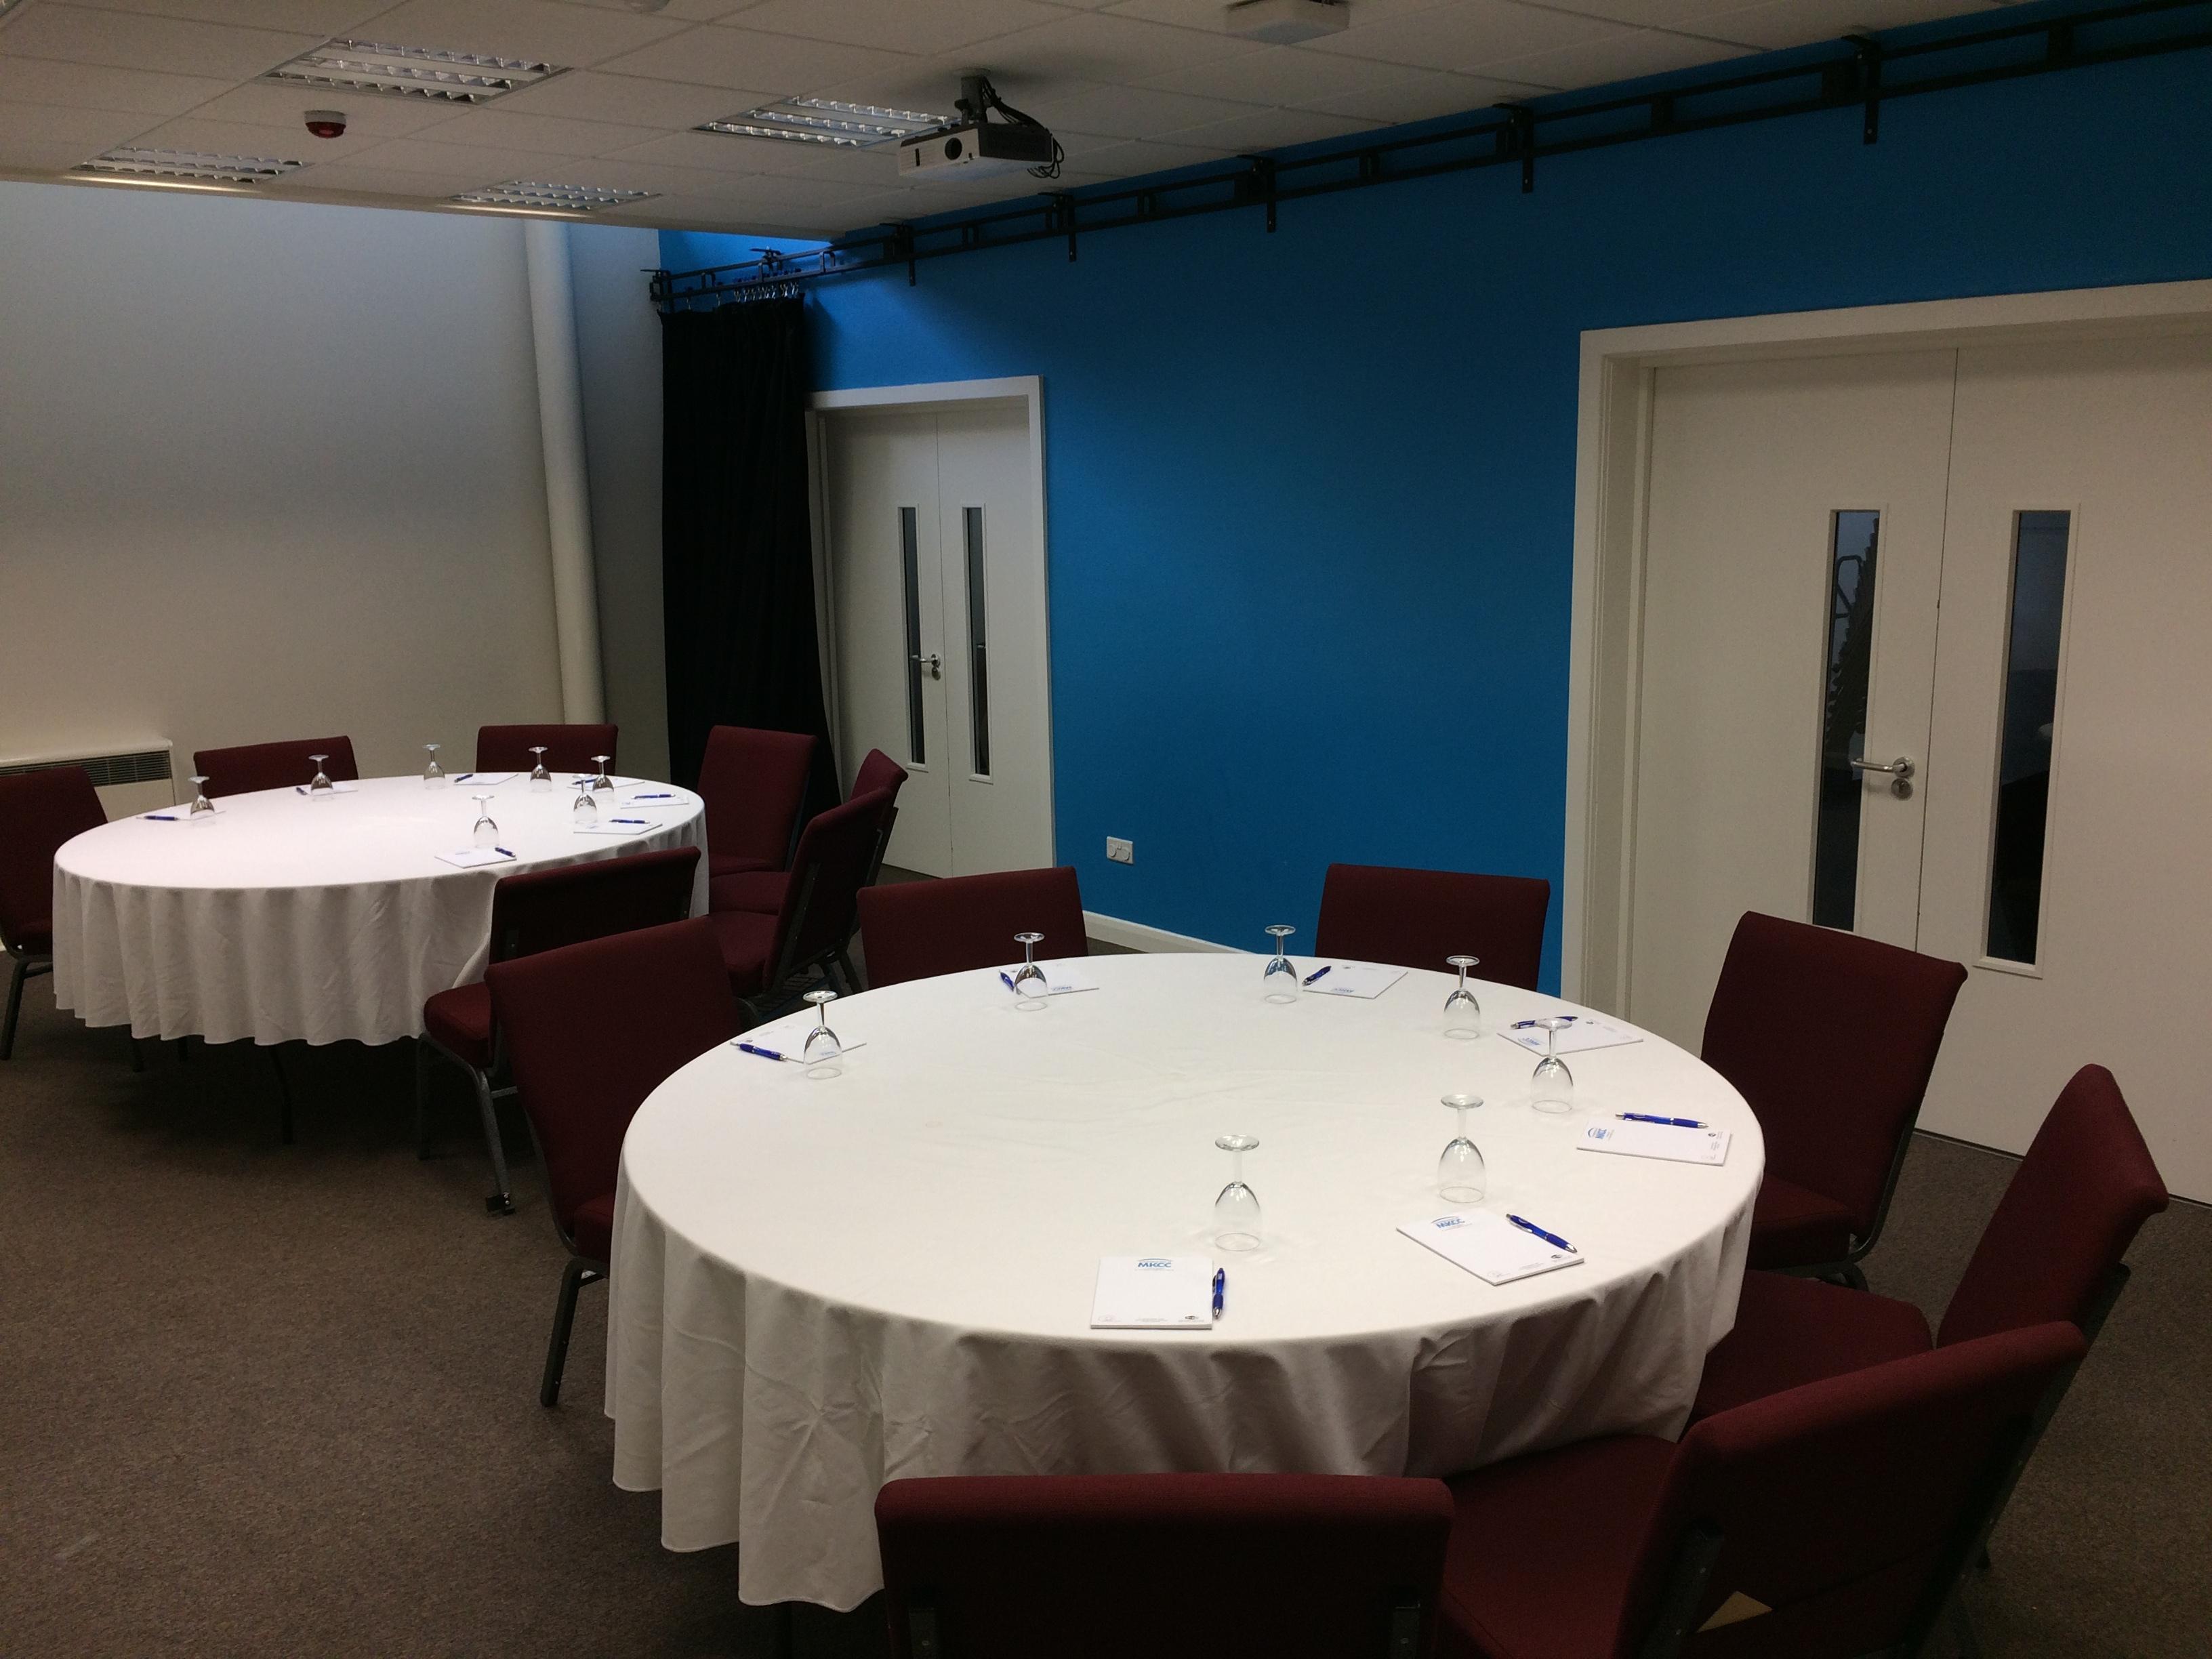 Discovery Suite 2, MK Conferencing photo #1